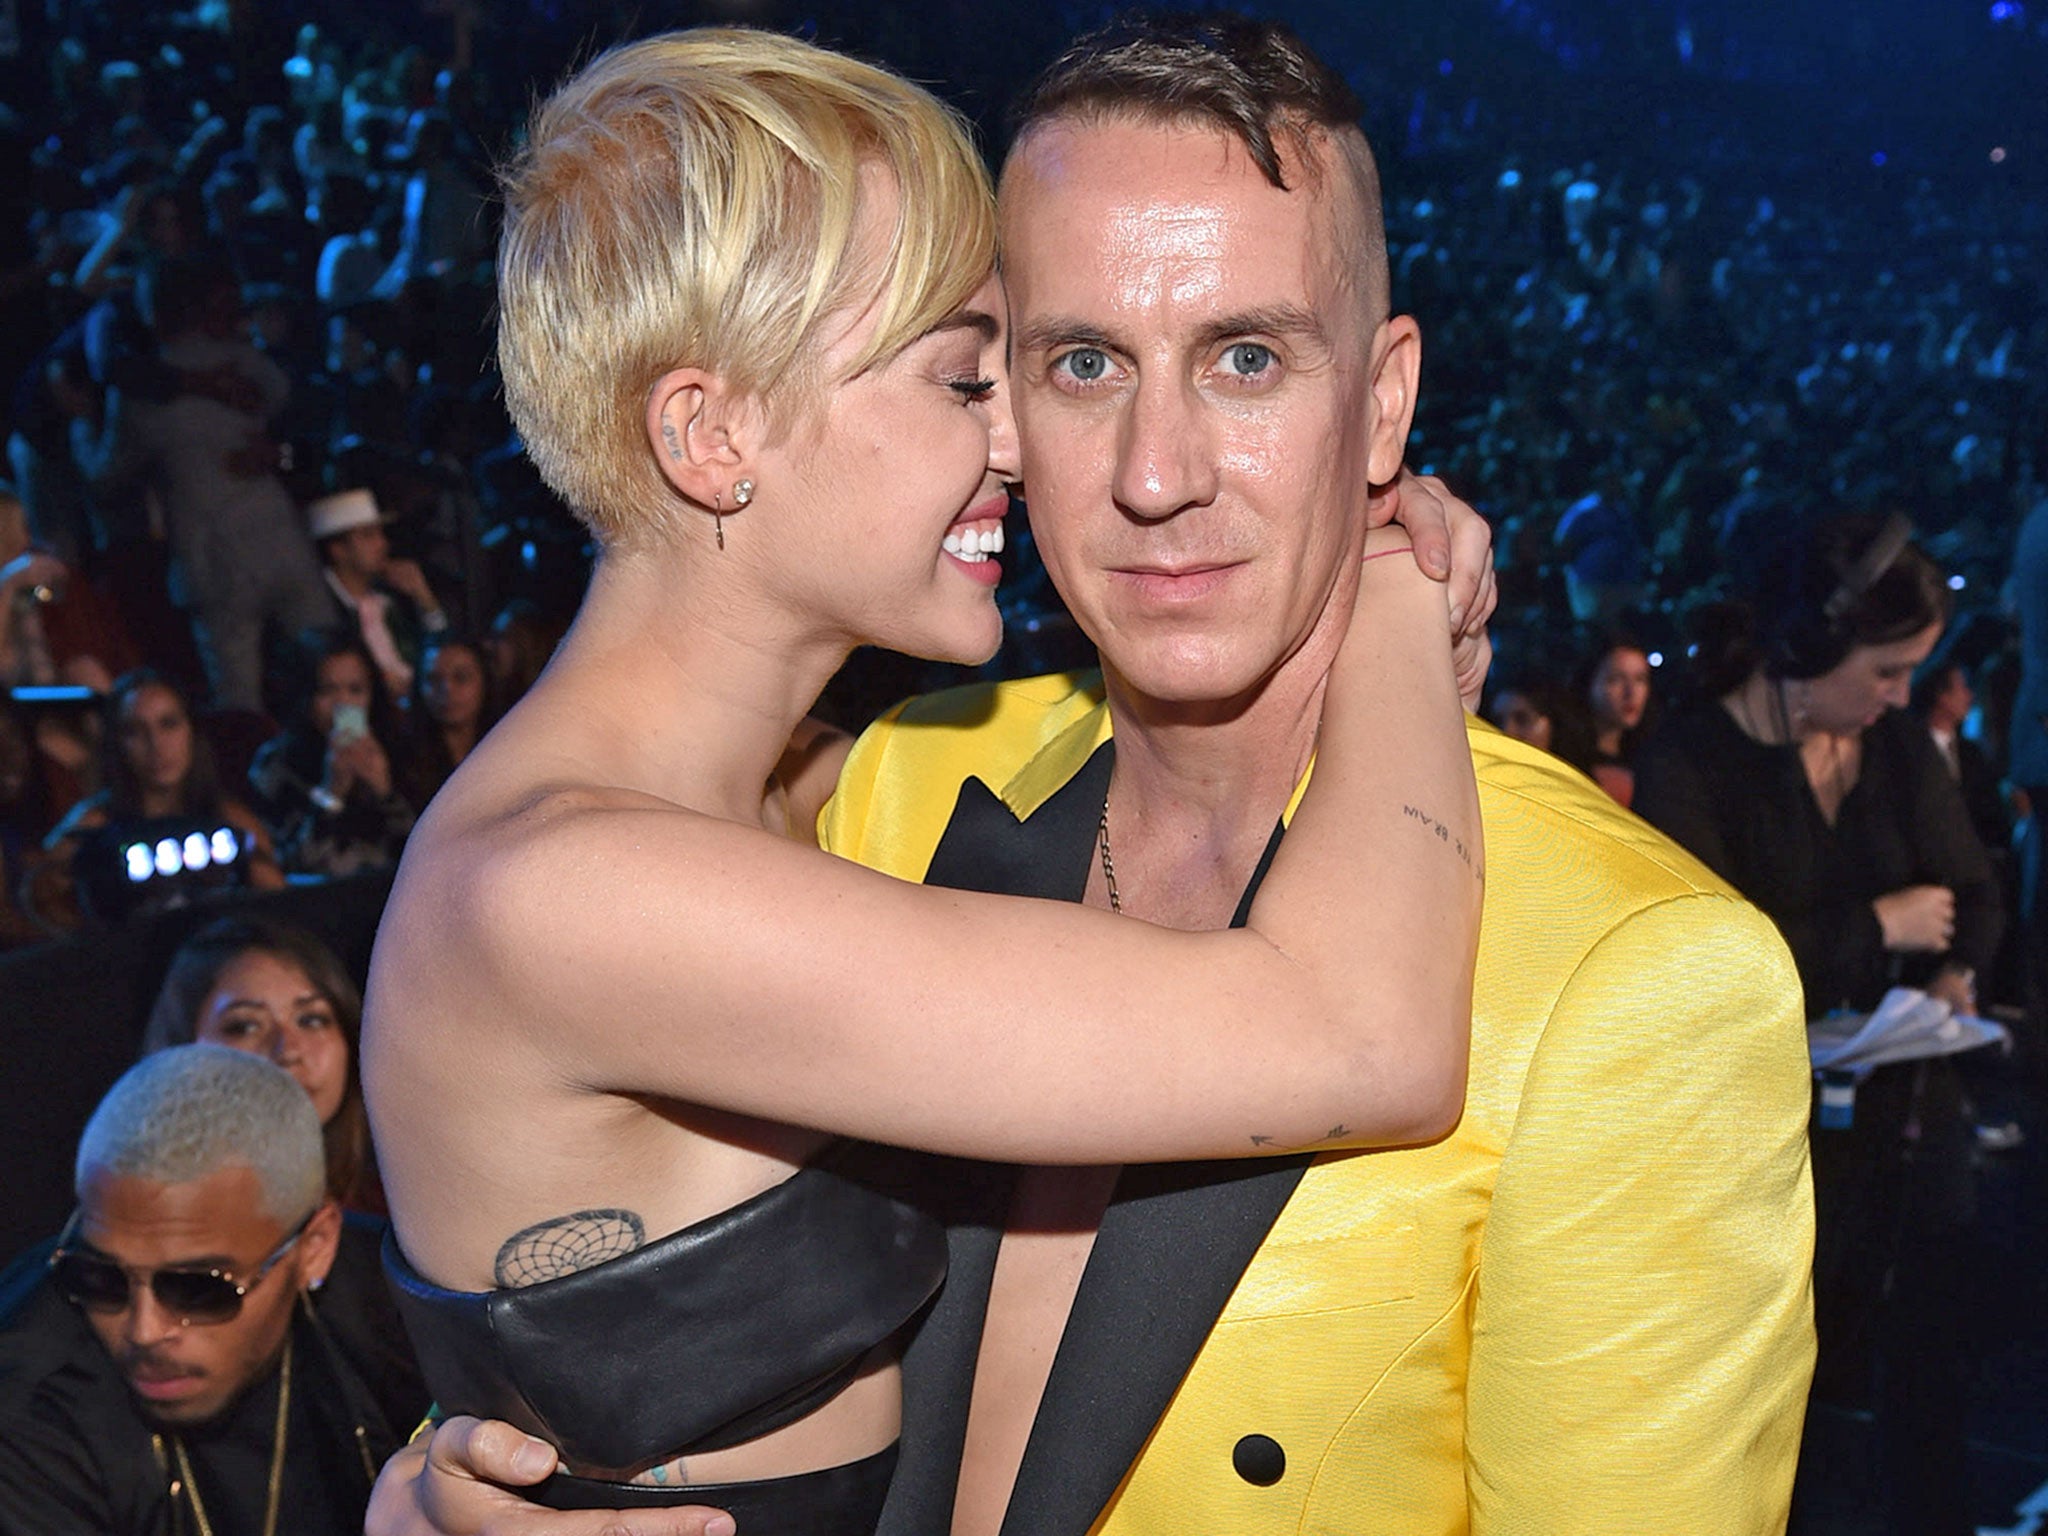 Miley Cyrus and Jeremy Scott at the VMAs